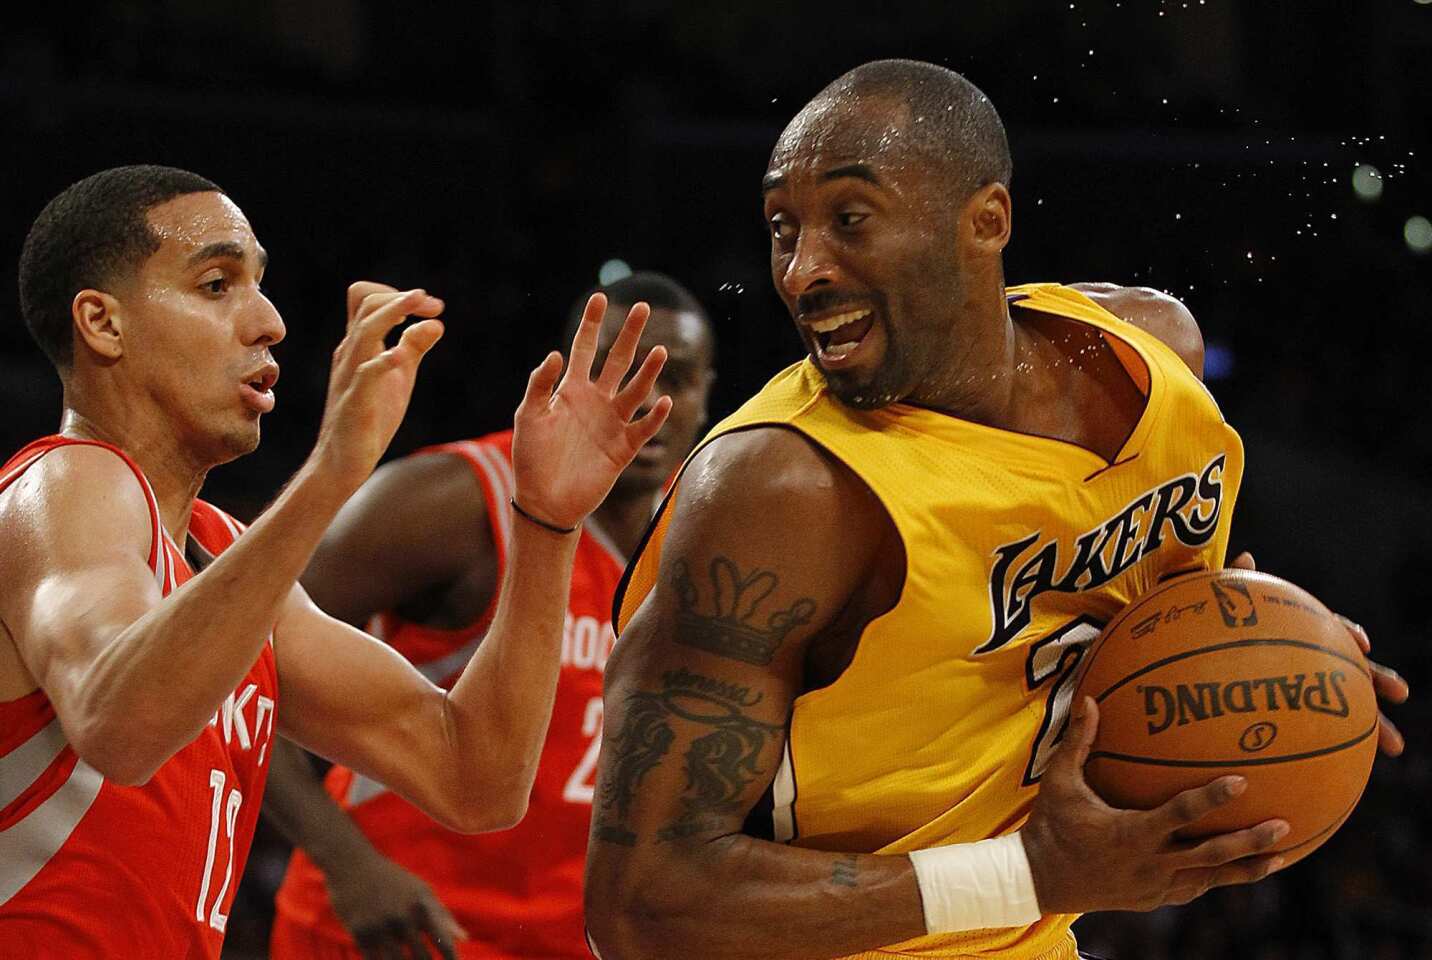 Lakers guard Kobe Bryant spins away from Rockets guard Kevin Martin before elevating for a shot in the fourth quarter Tuesday night at Staples Center.